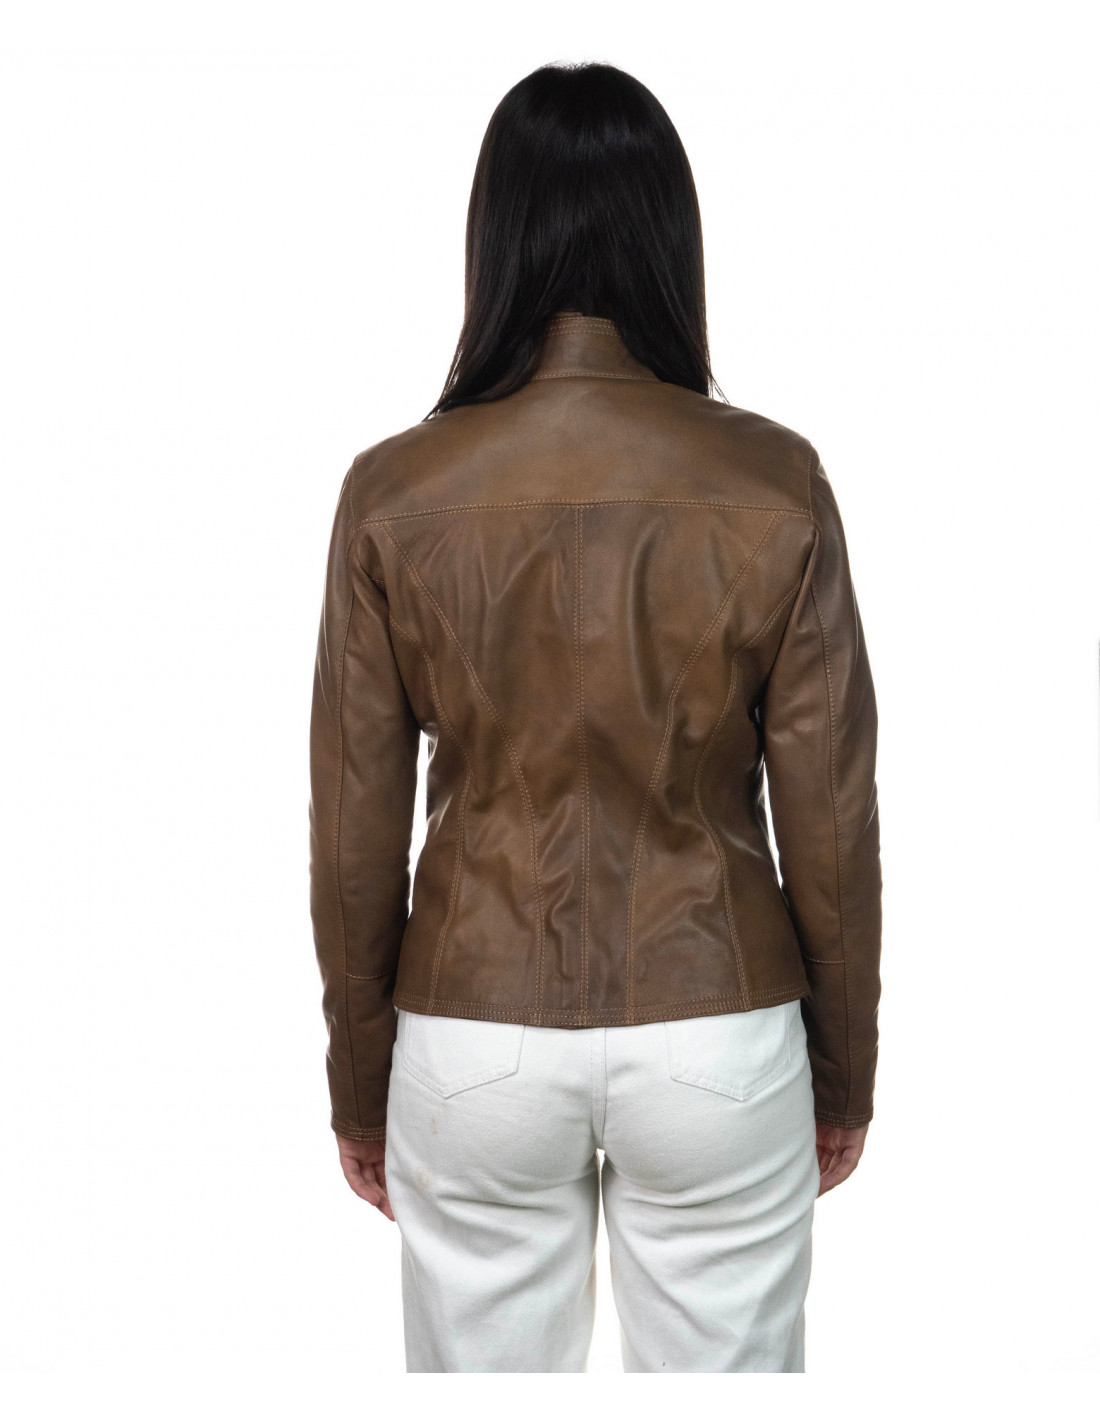 Woman jacket mod. Zara in genuine Brown leather 100% made in Italy